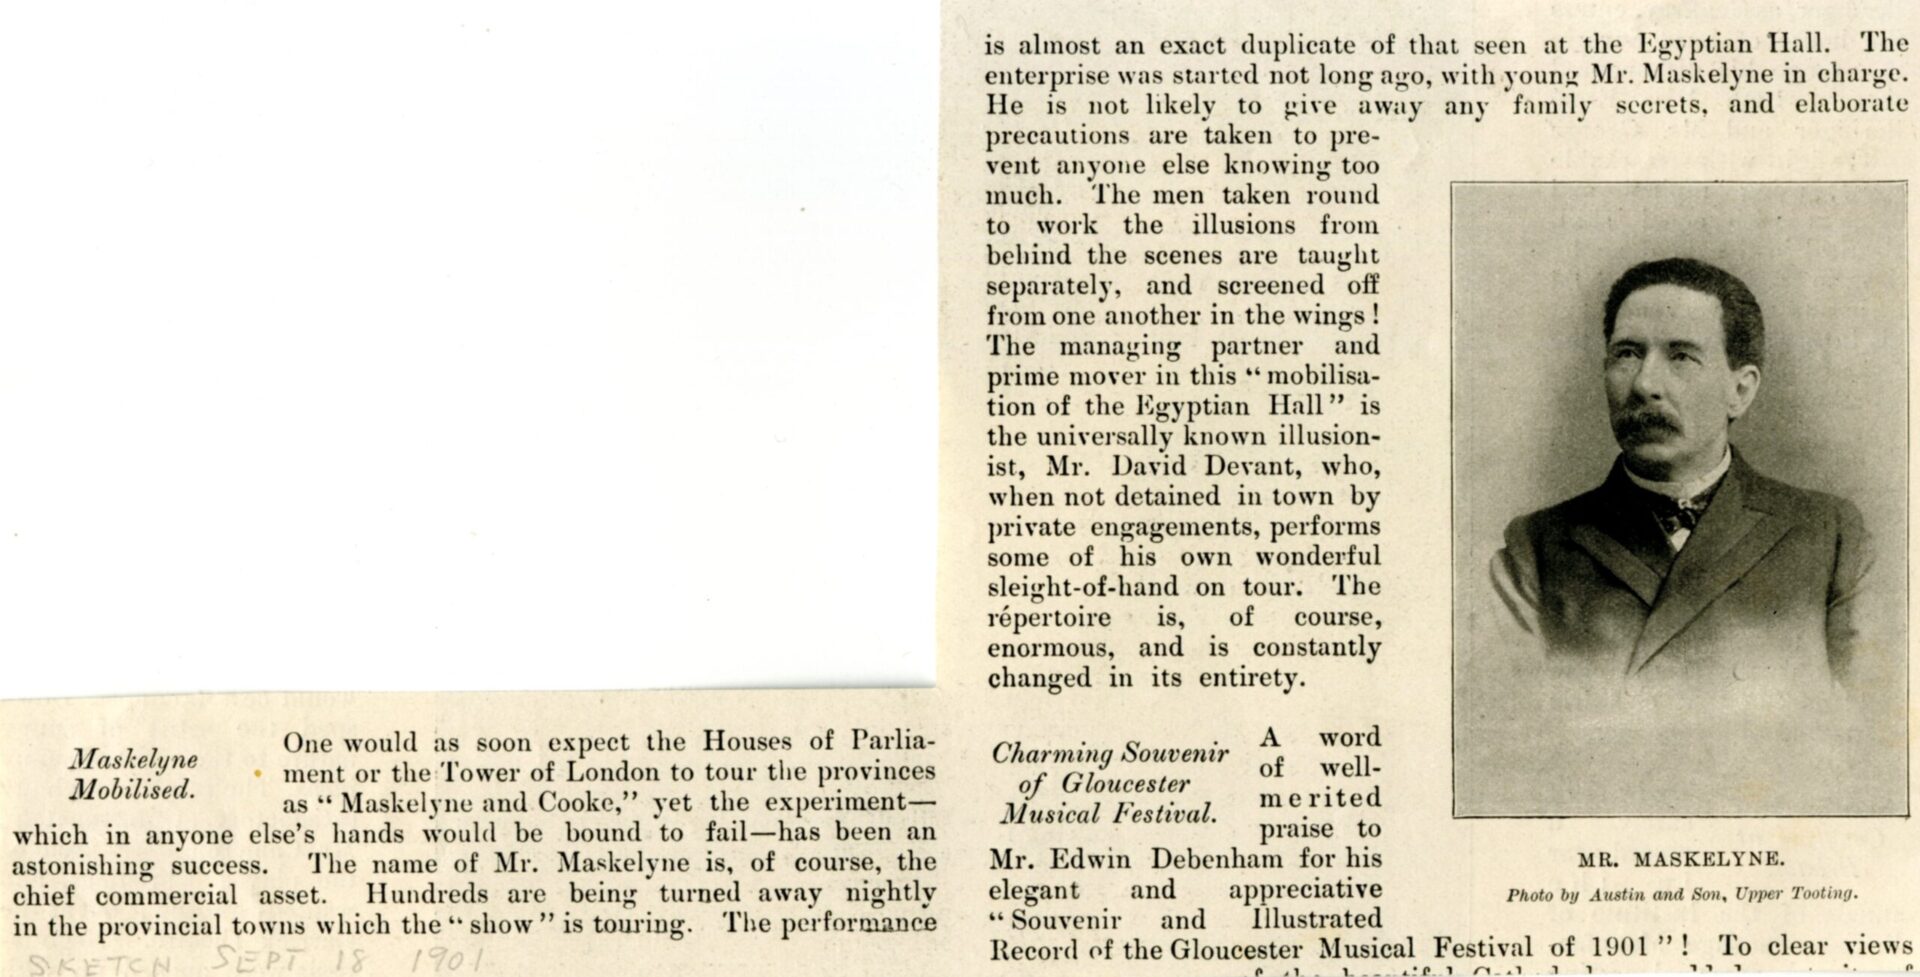 Article in ‘The Sketch’ of 18 September 1901 about the current Maskelyne and Cooke Mysteries Provincial Tour